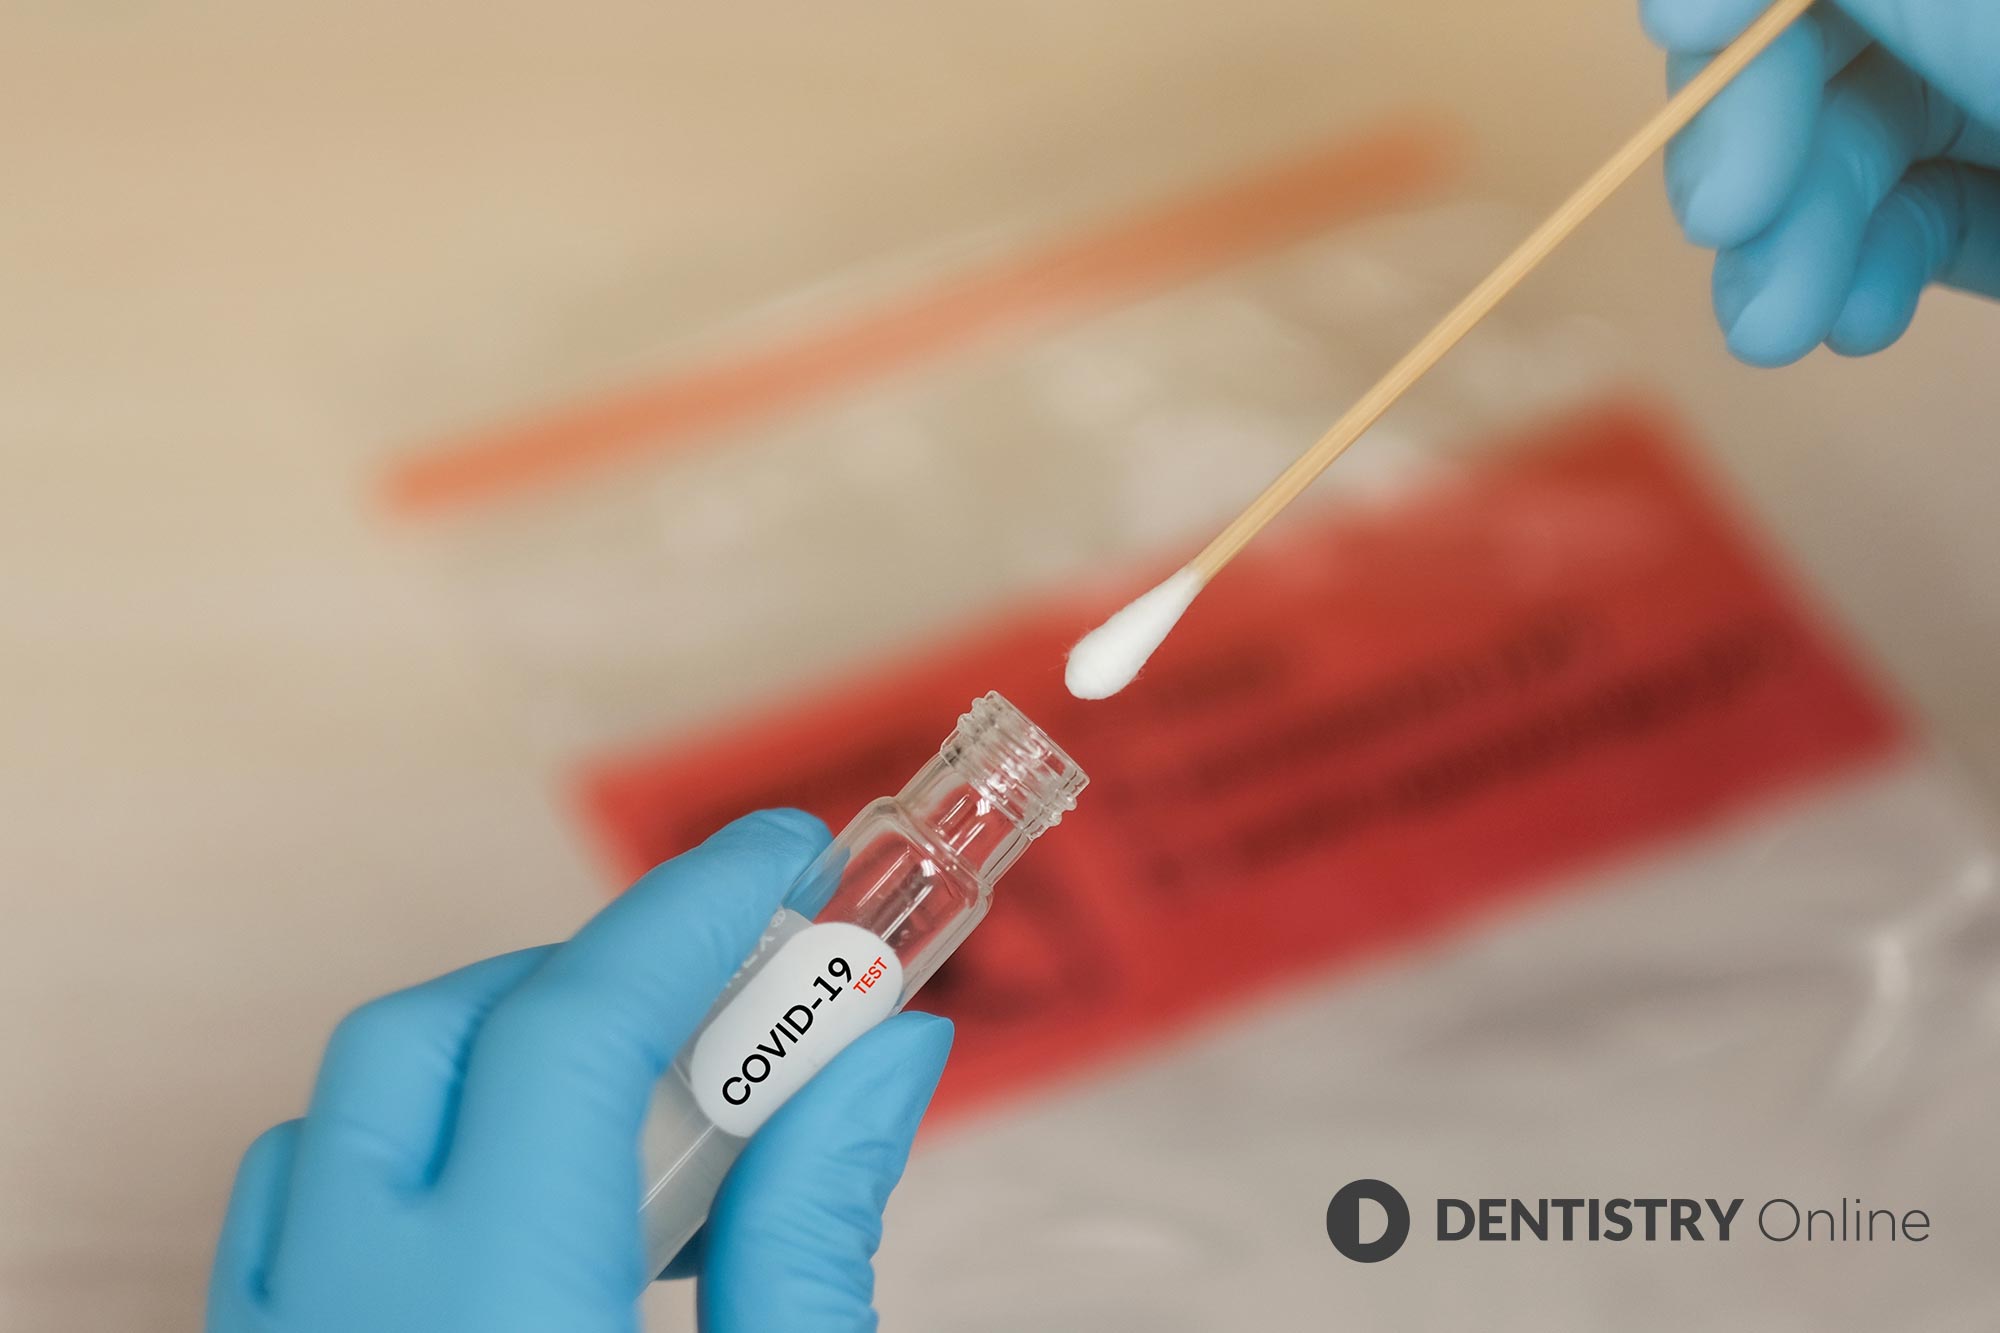 Less than 1% of dentists were found to be COVID-19 positive, according to a new report